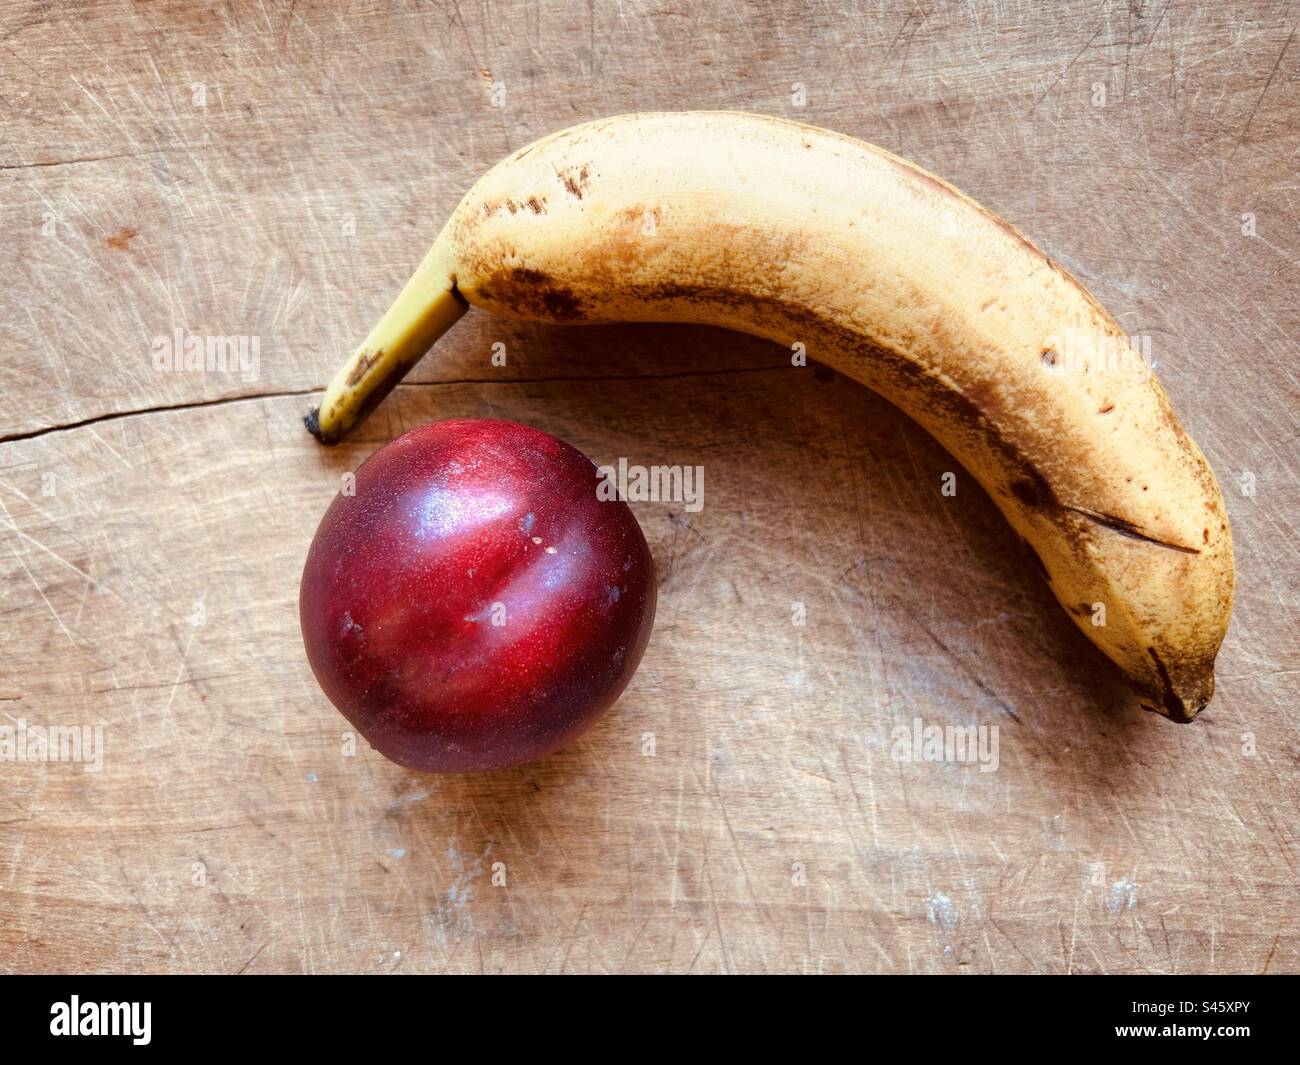 Banana and nectarine on a wooden chopping board. Fresh fruit ready to eat. Stock Photo